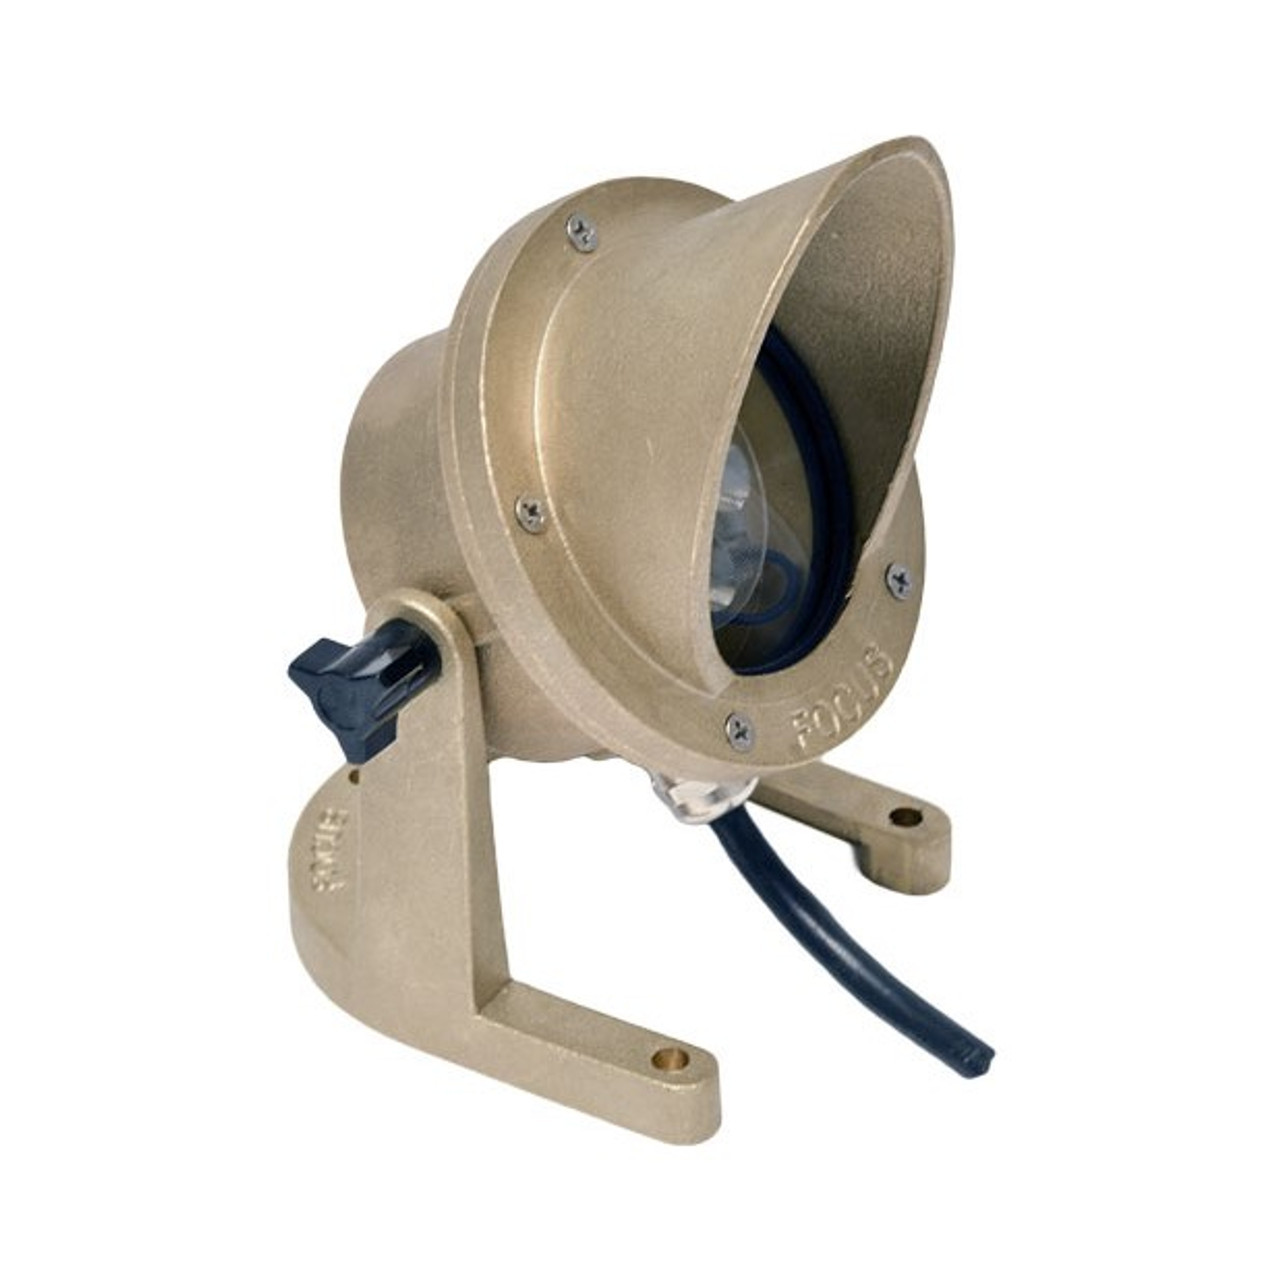 Focus Industries SL-11-ABAC-LEDM740-BAR Cast Brass 7W 3000K Integrated LED Underwater Light with Aiming Bracket and Angle Collar, 40° Flood, Acid Rust